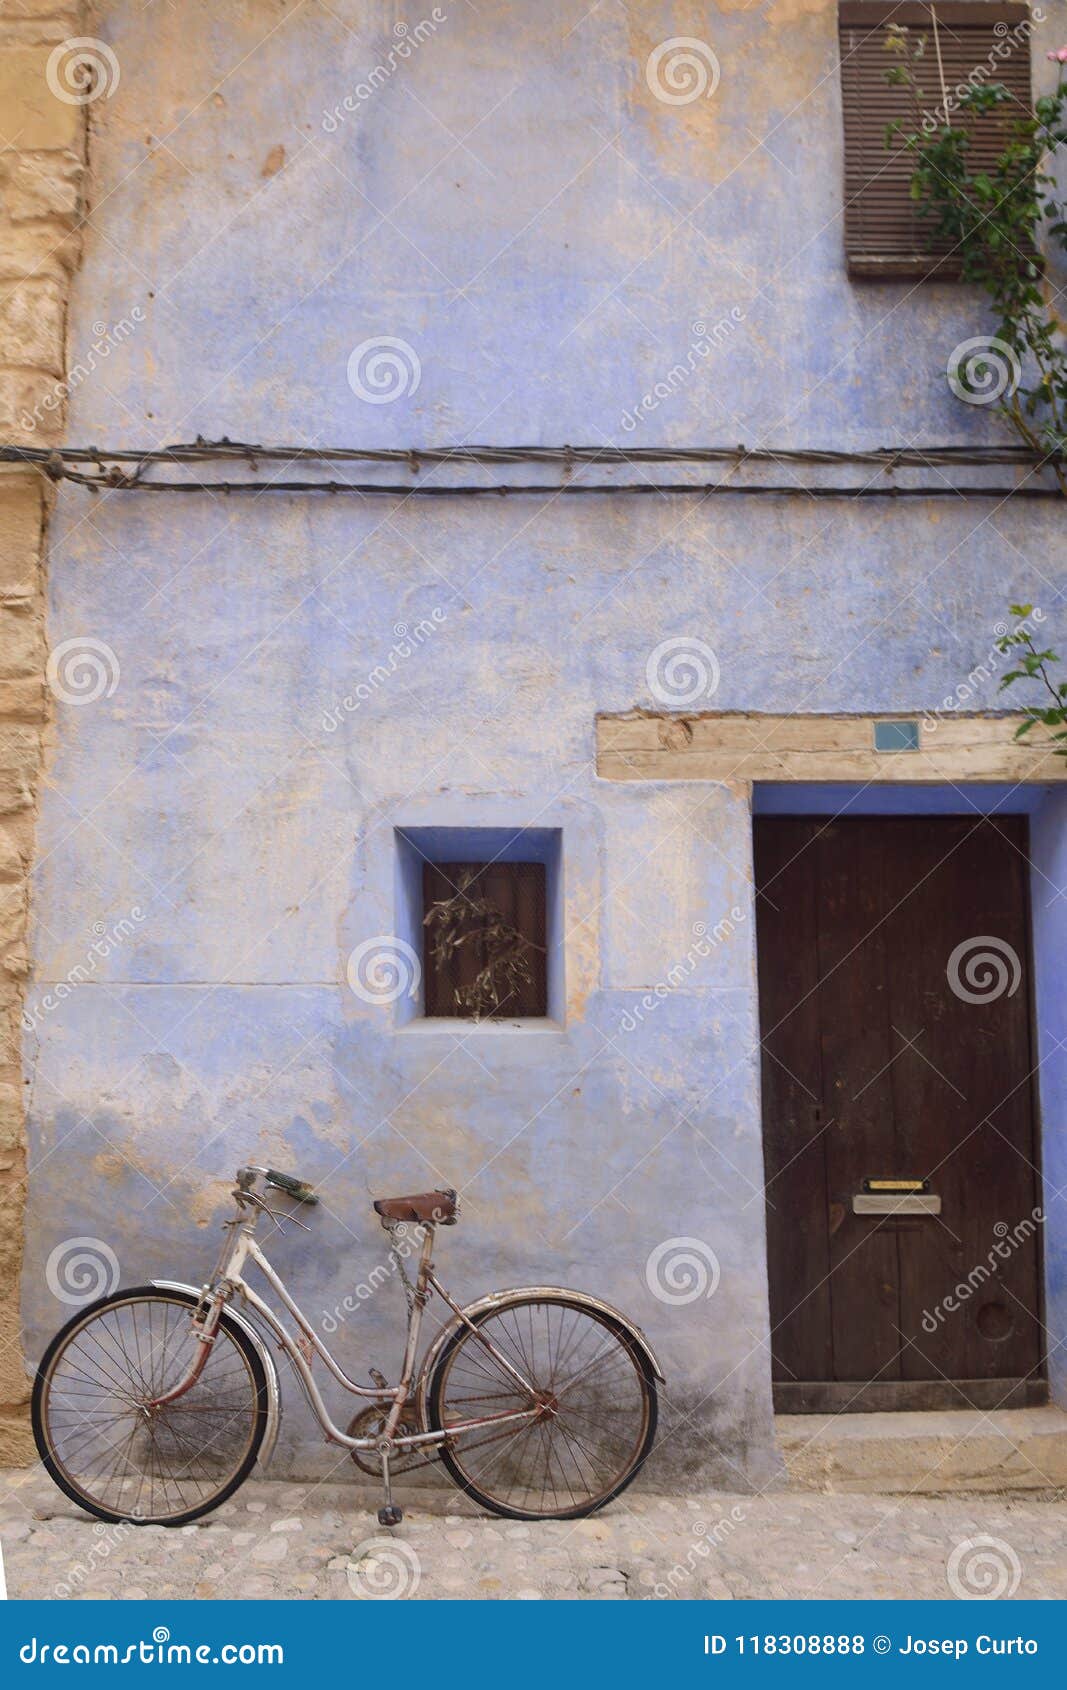 streets and corners of the medieval village of valderrobres, man